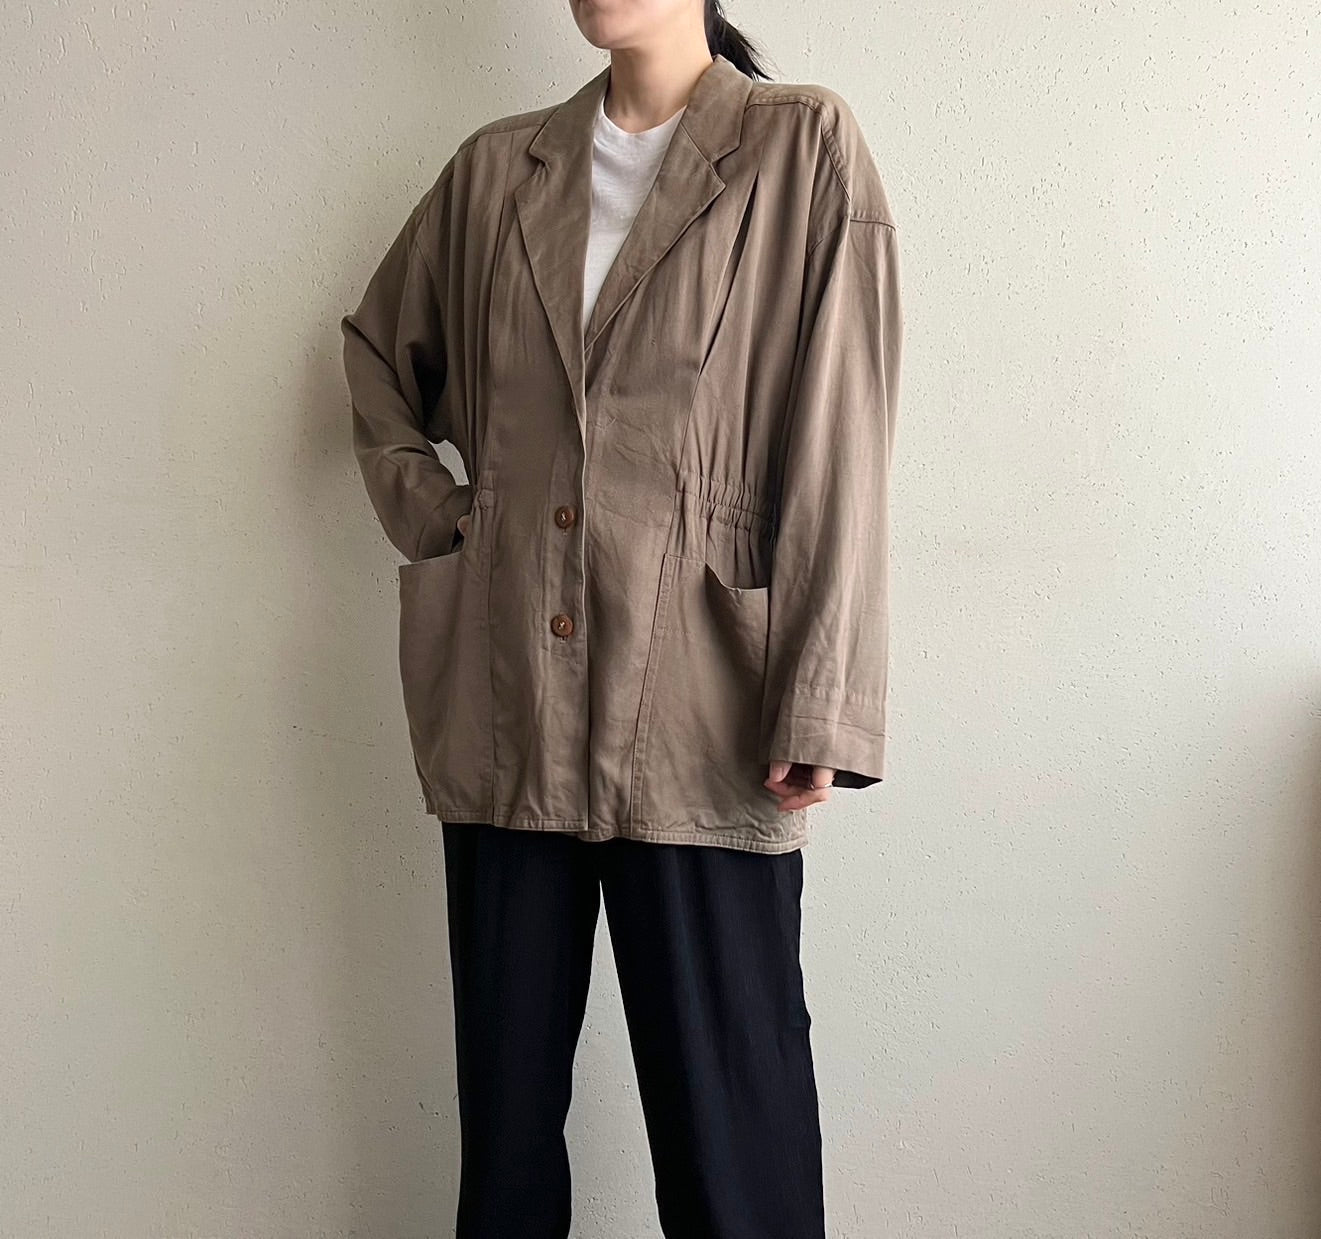 90s Rayon Jacket Made in France